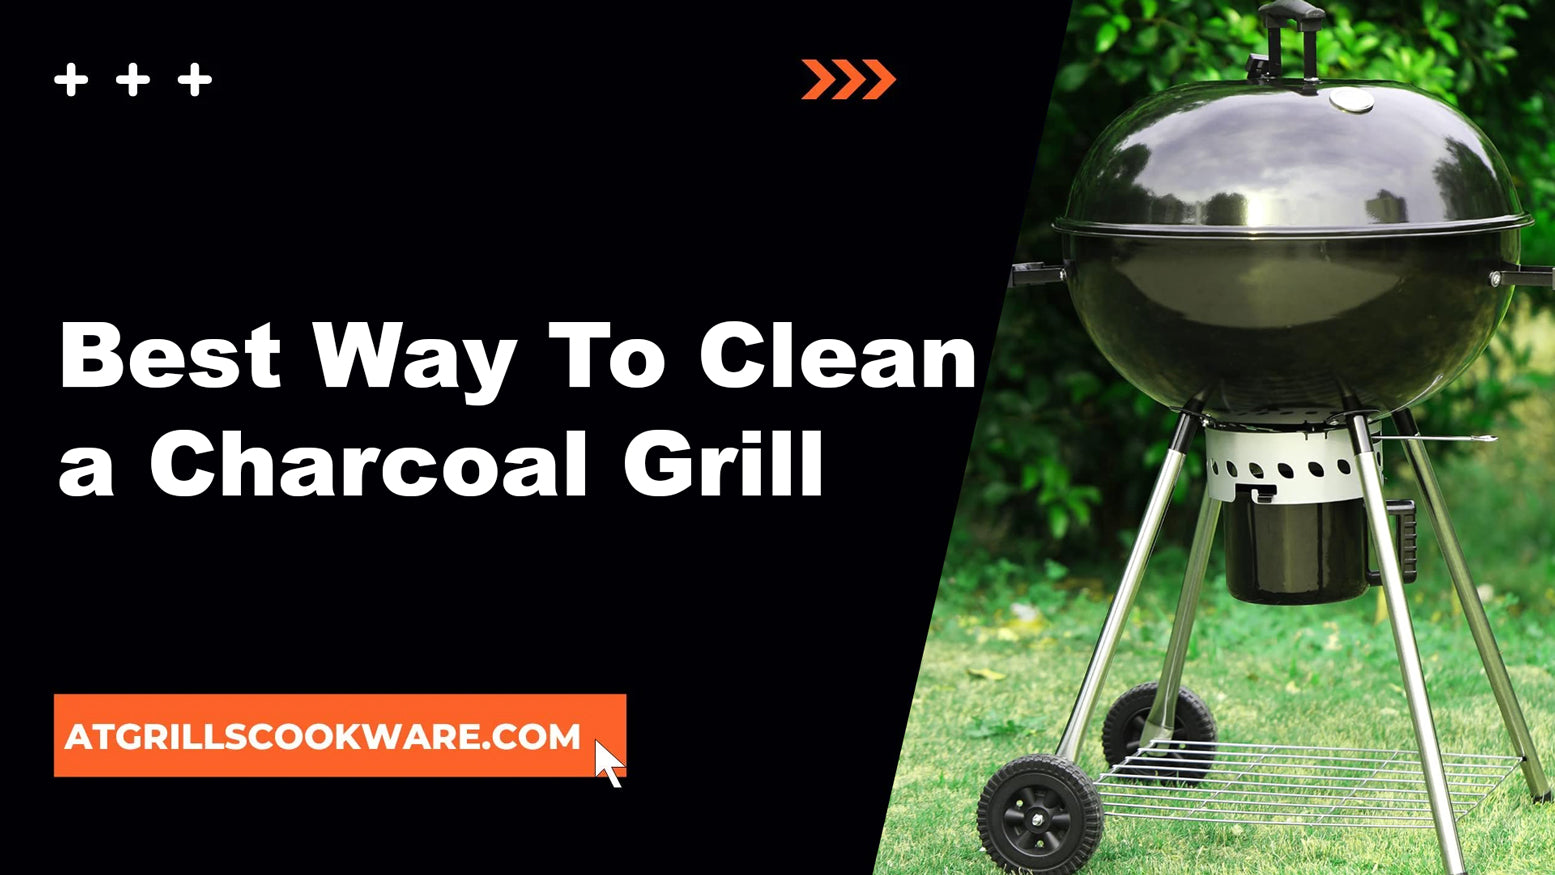 Light Up Your Grilling Game: How to Clean a Charcoal Grill the Right Way